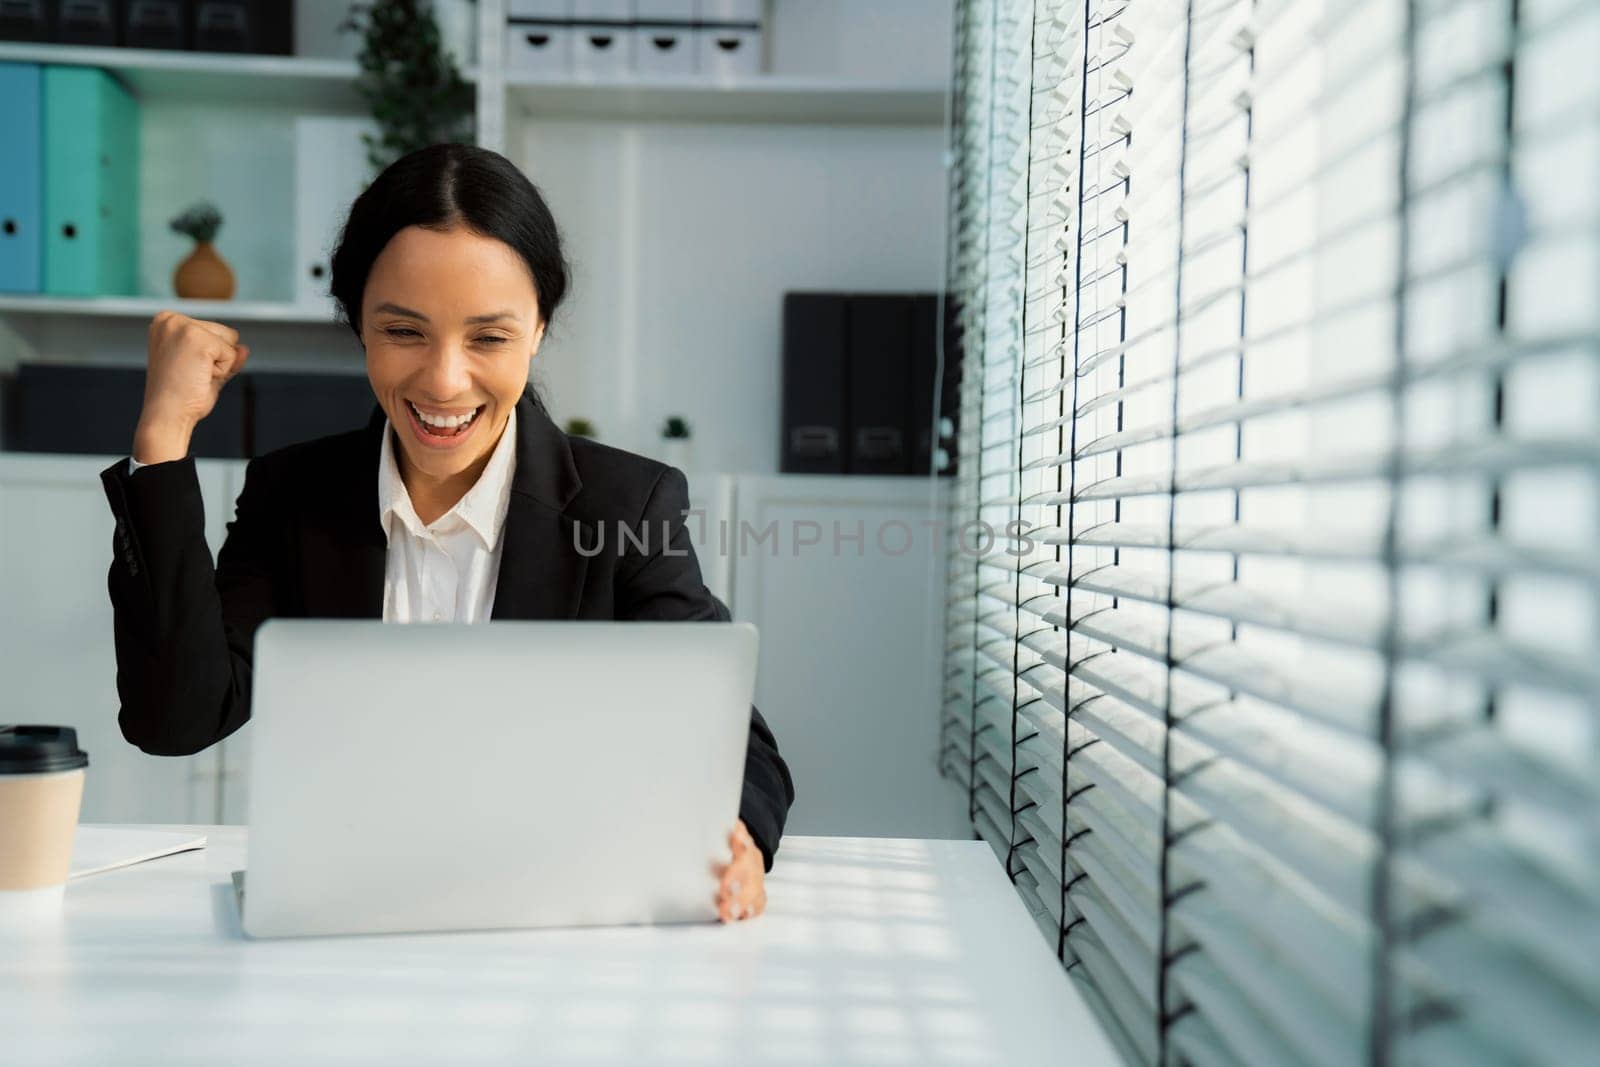 This photo depicts a young African American and competent woman at her workplace. A female employee in her office at work.